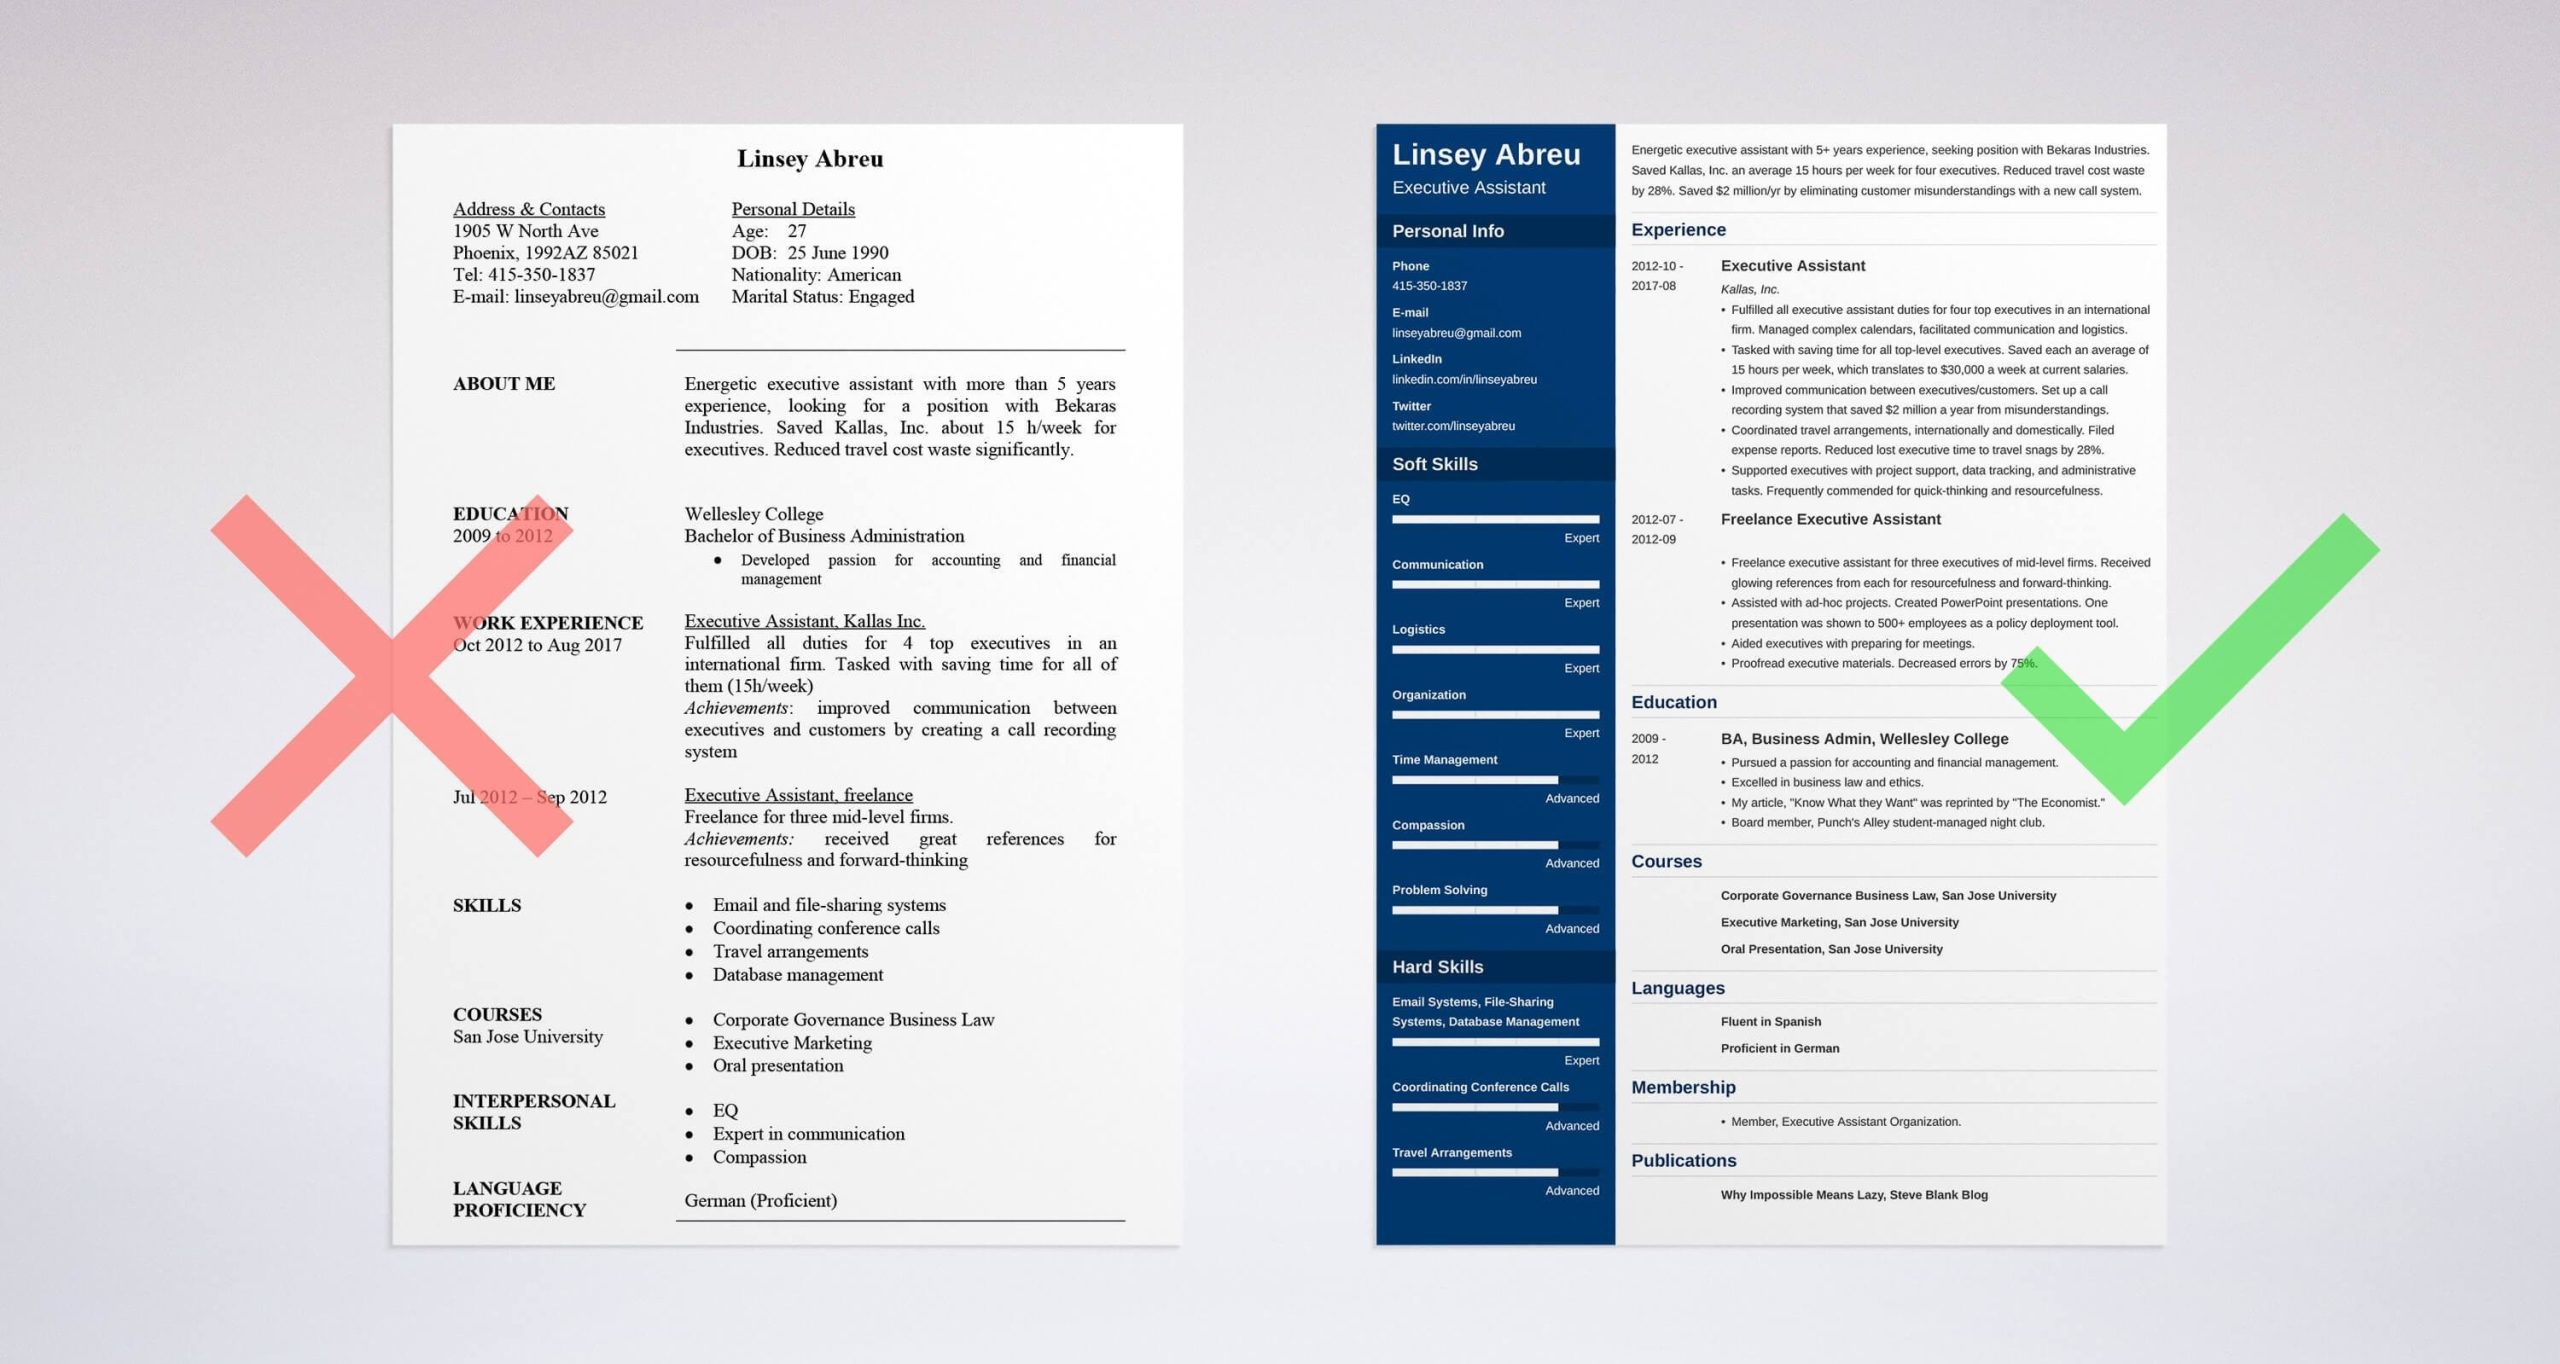 High Level Executive assistant Resume Sample Executive assistant Resume Sample [lancarrezekiqskills & Objective]